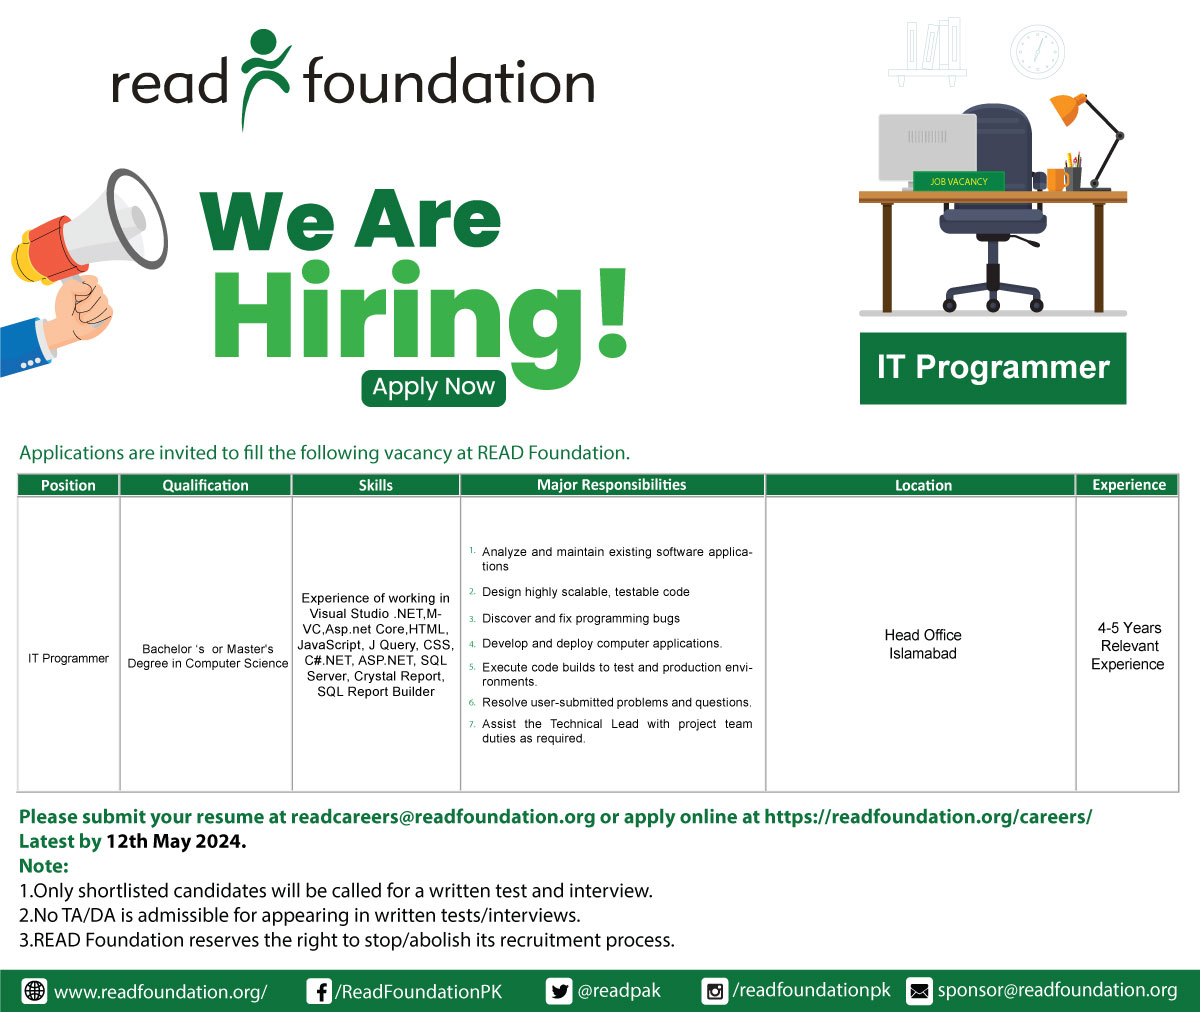 Job Alert!!! Elevate your career with us. We're on the hunt for talent, if that's you, send in your application now! Please apply at the given link: readfoundation.org/careers/ (For any queries, please get in touch with us at +92 051 8482157 during office hours). #READFoundation